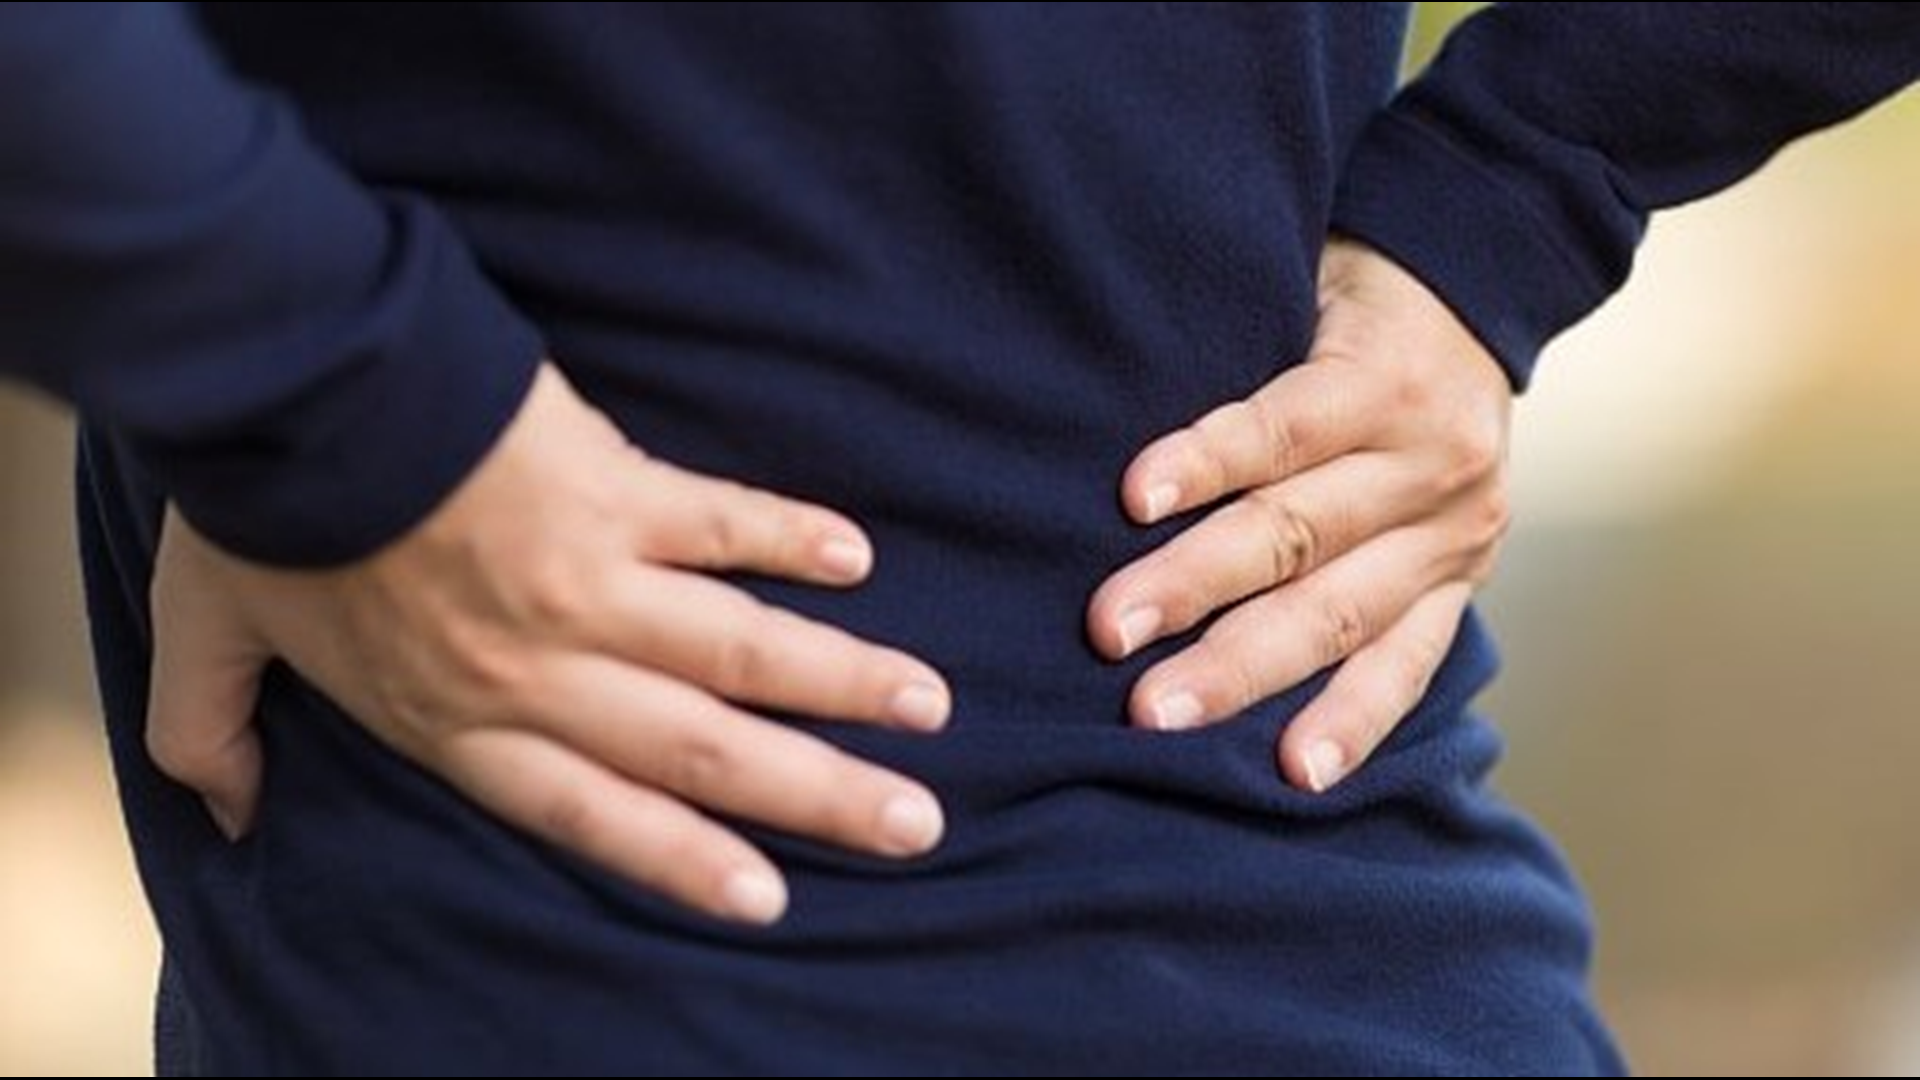 Having back pain is common these days and it may feel like things have popped out of place. Dr. Michael Kwast, CEO of iChiro Clinics, stopped by to give us some insight on that popping sensation you may be feeling in your back.